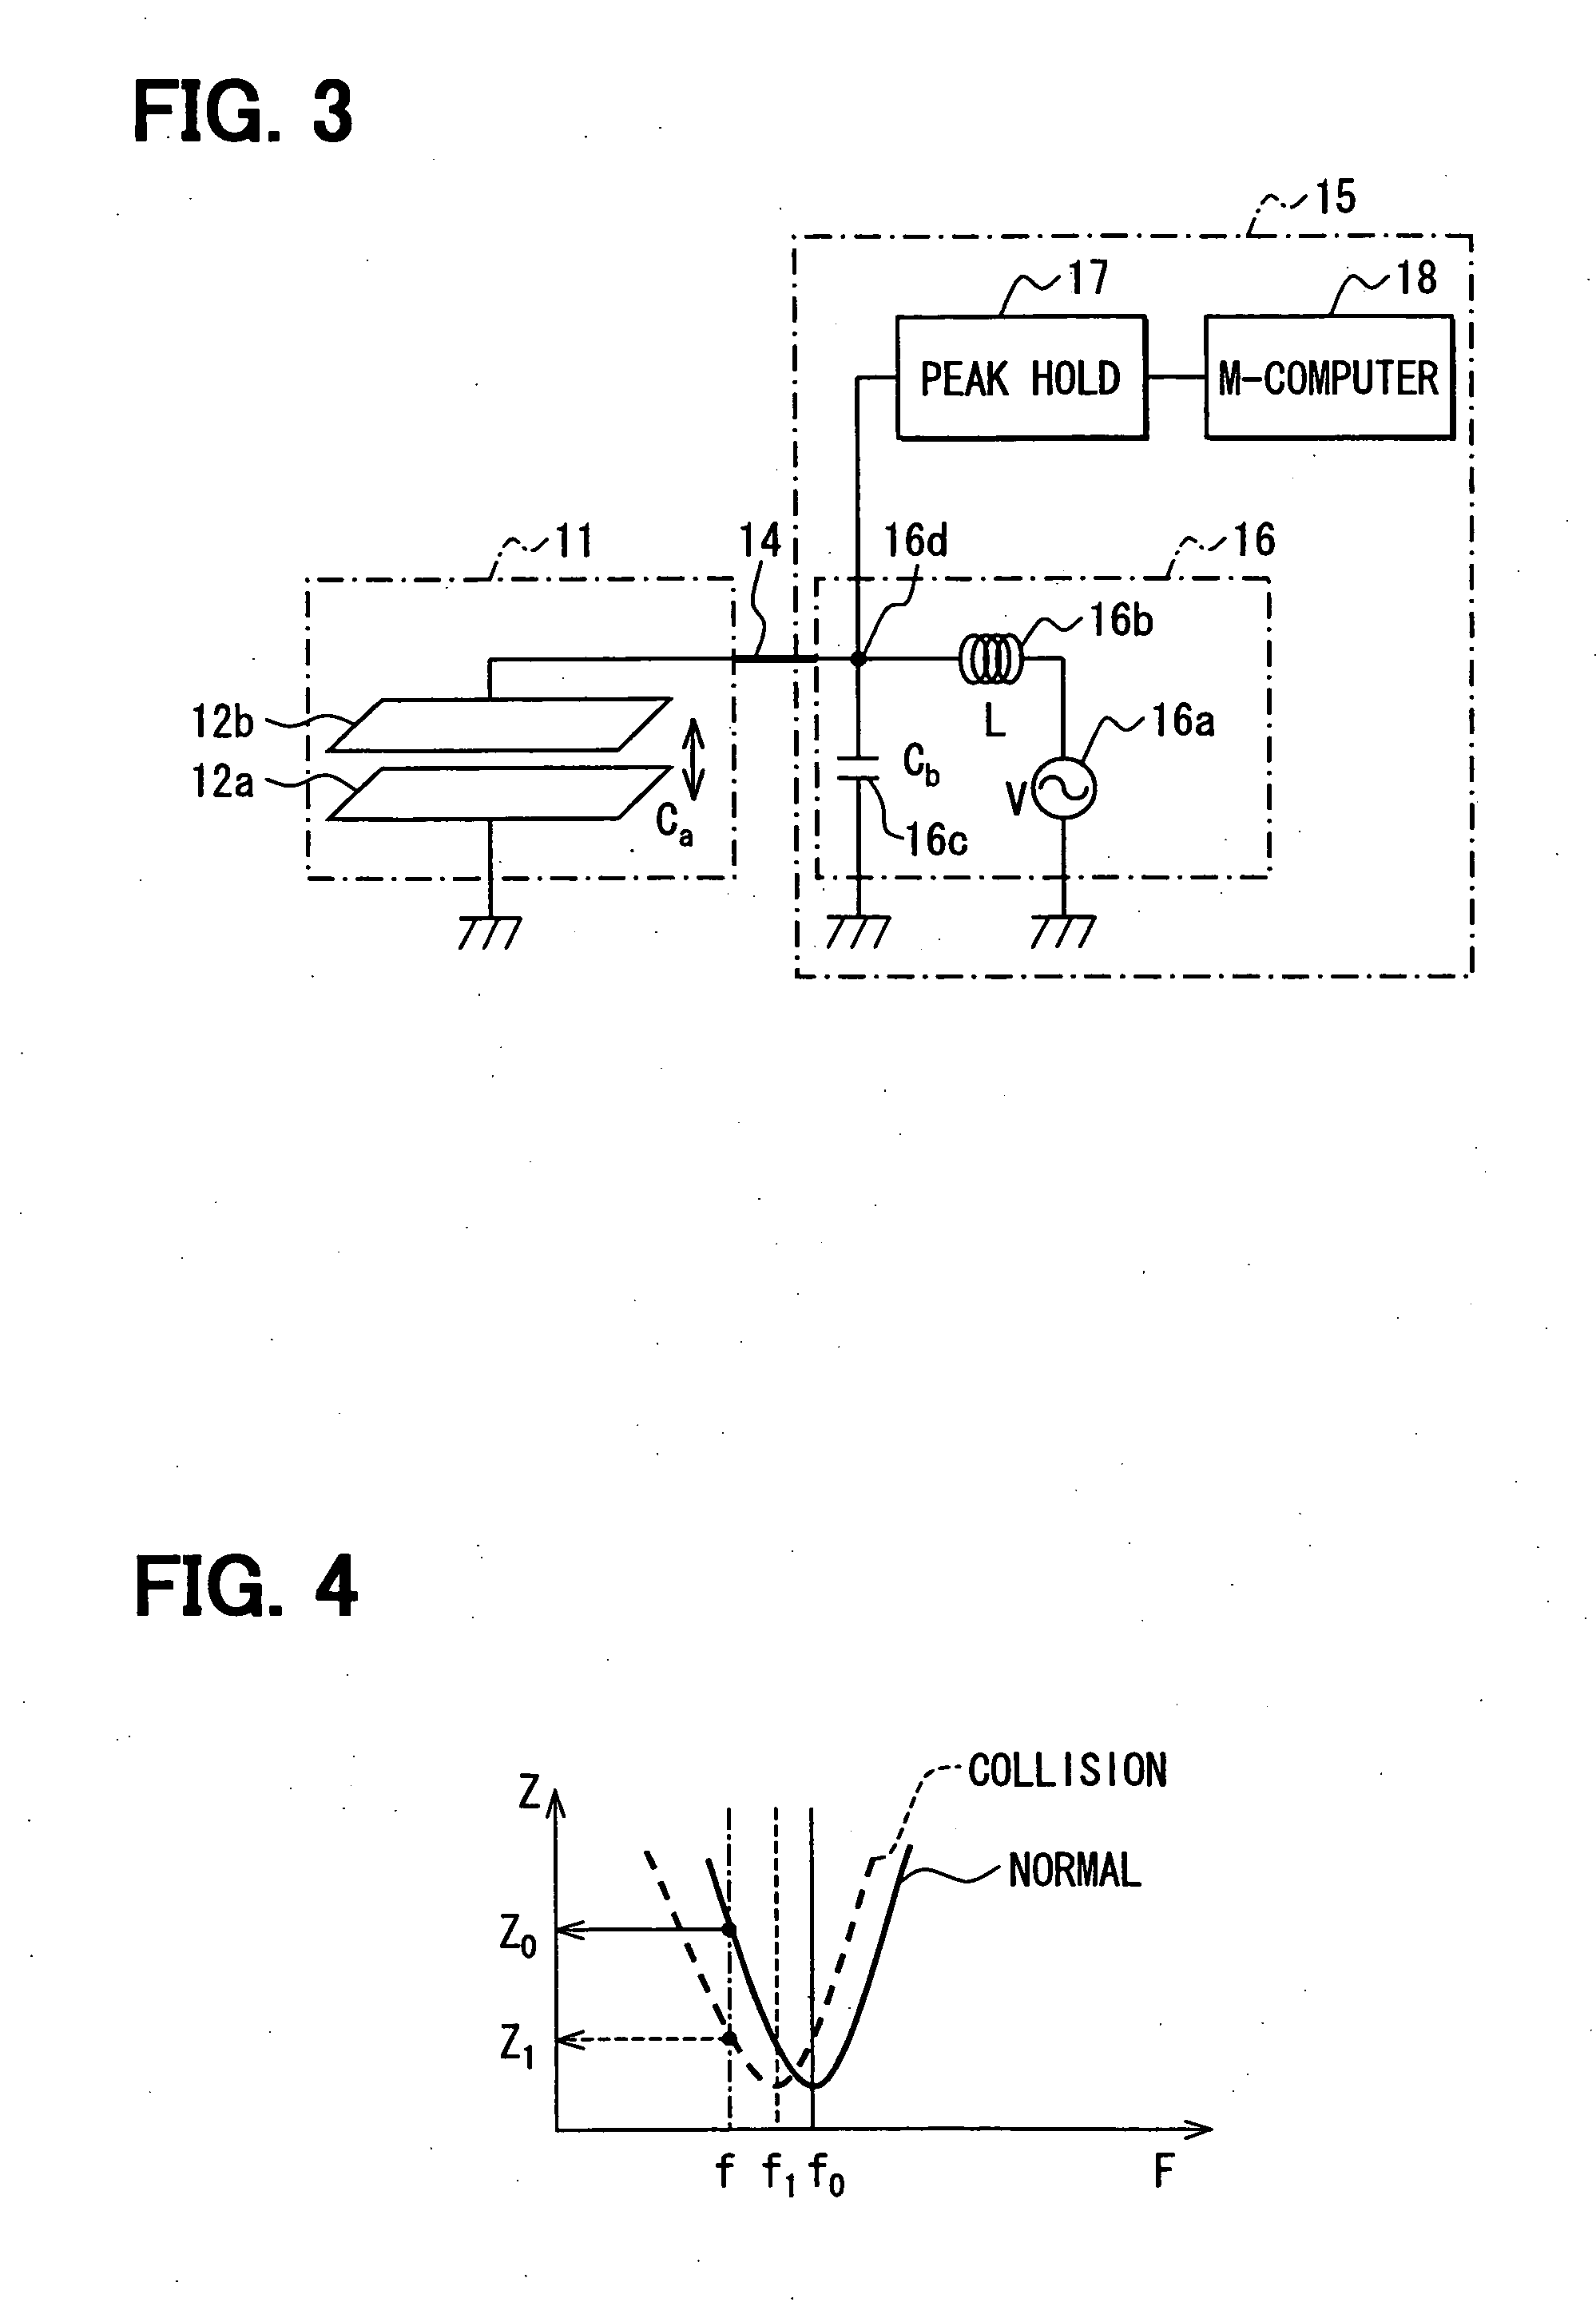 Vehicle collision detecting device